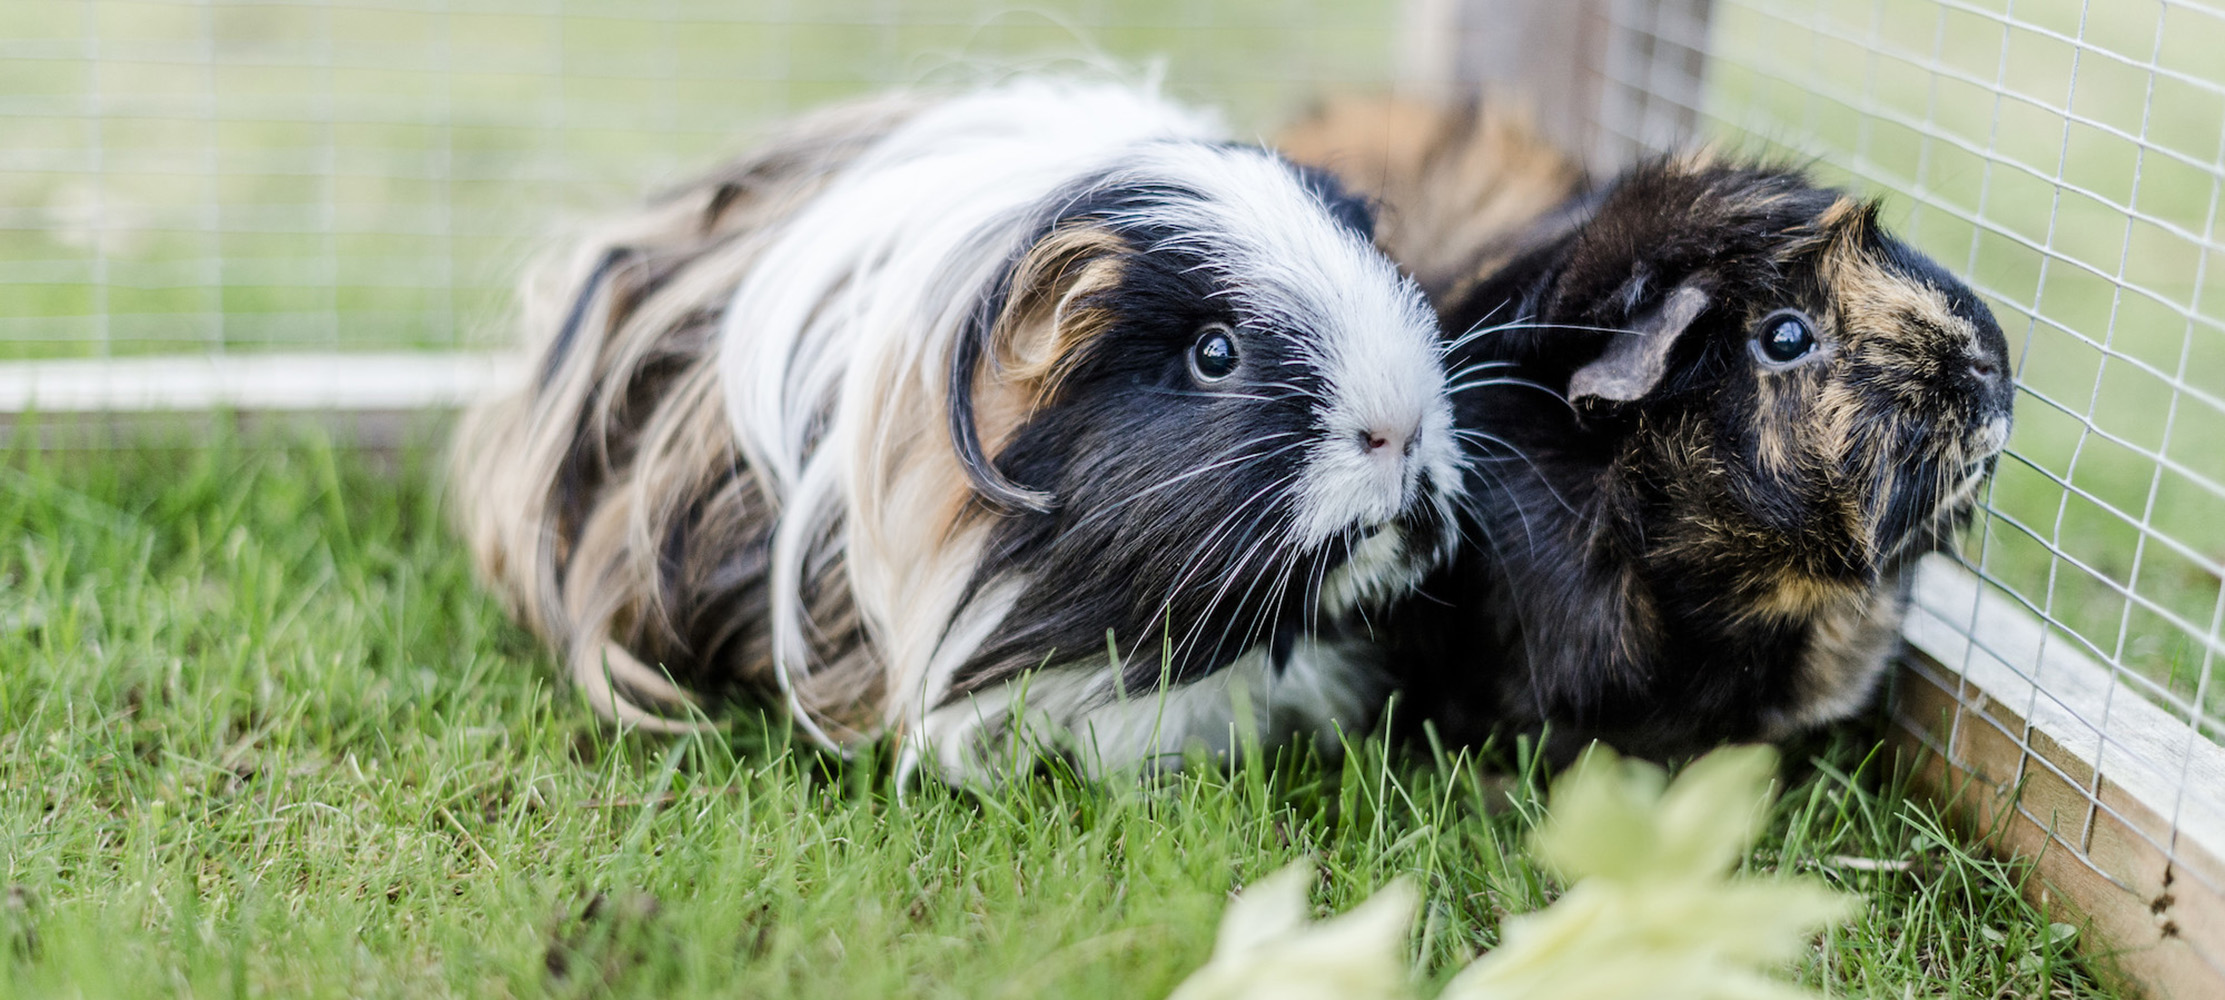 Two guinea pigs in their outdoor run